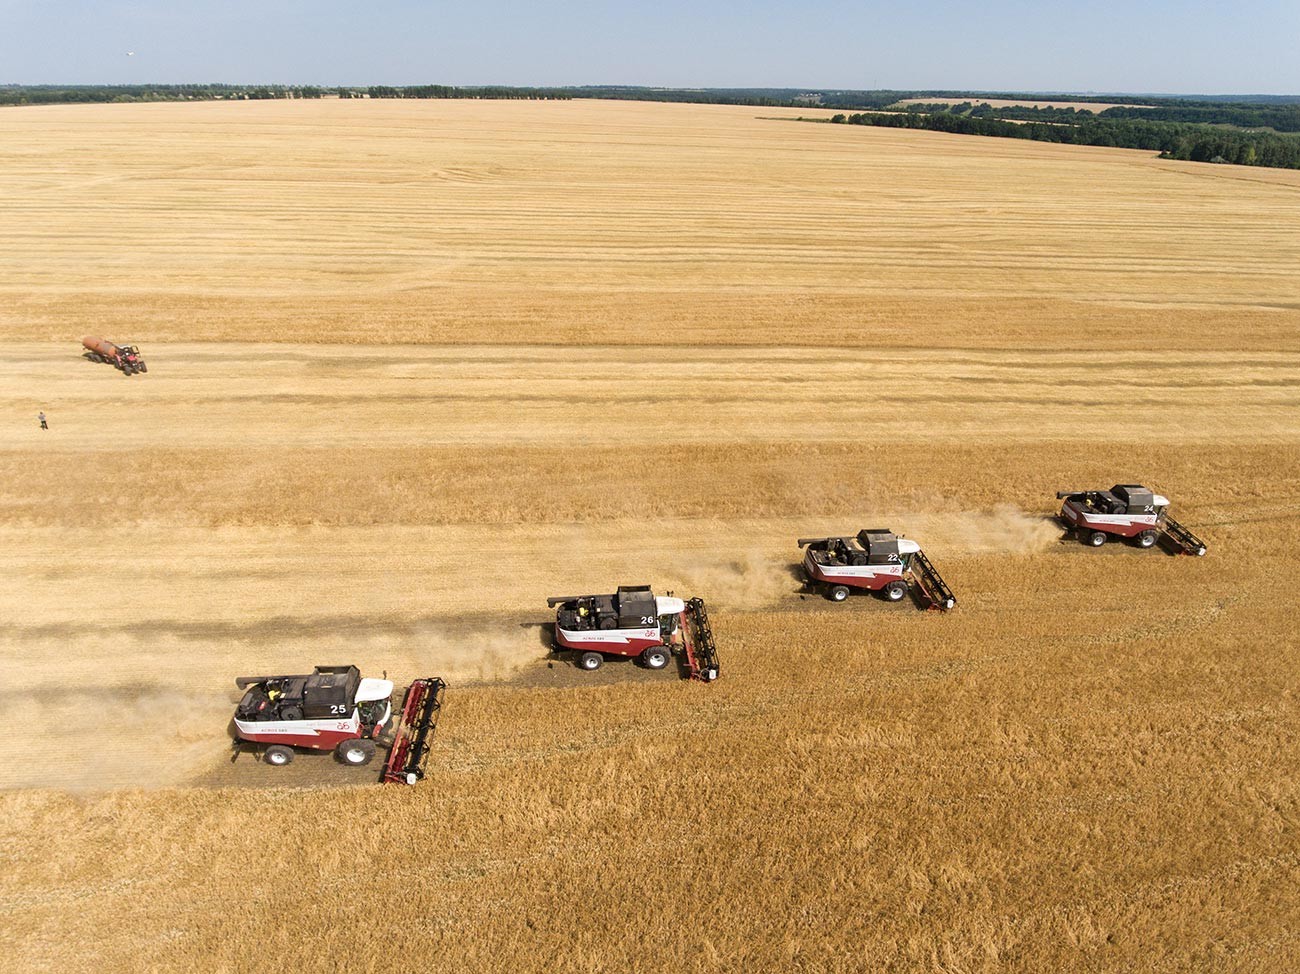 Harvesting combines in a wheat field.